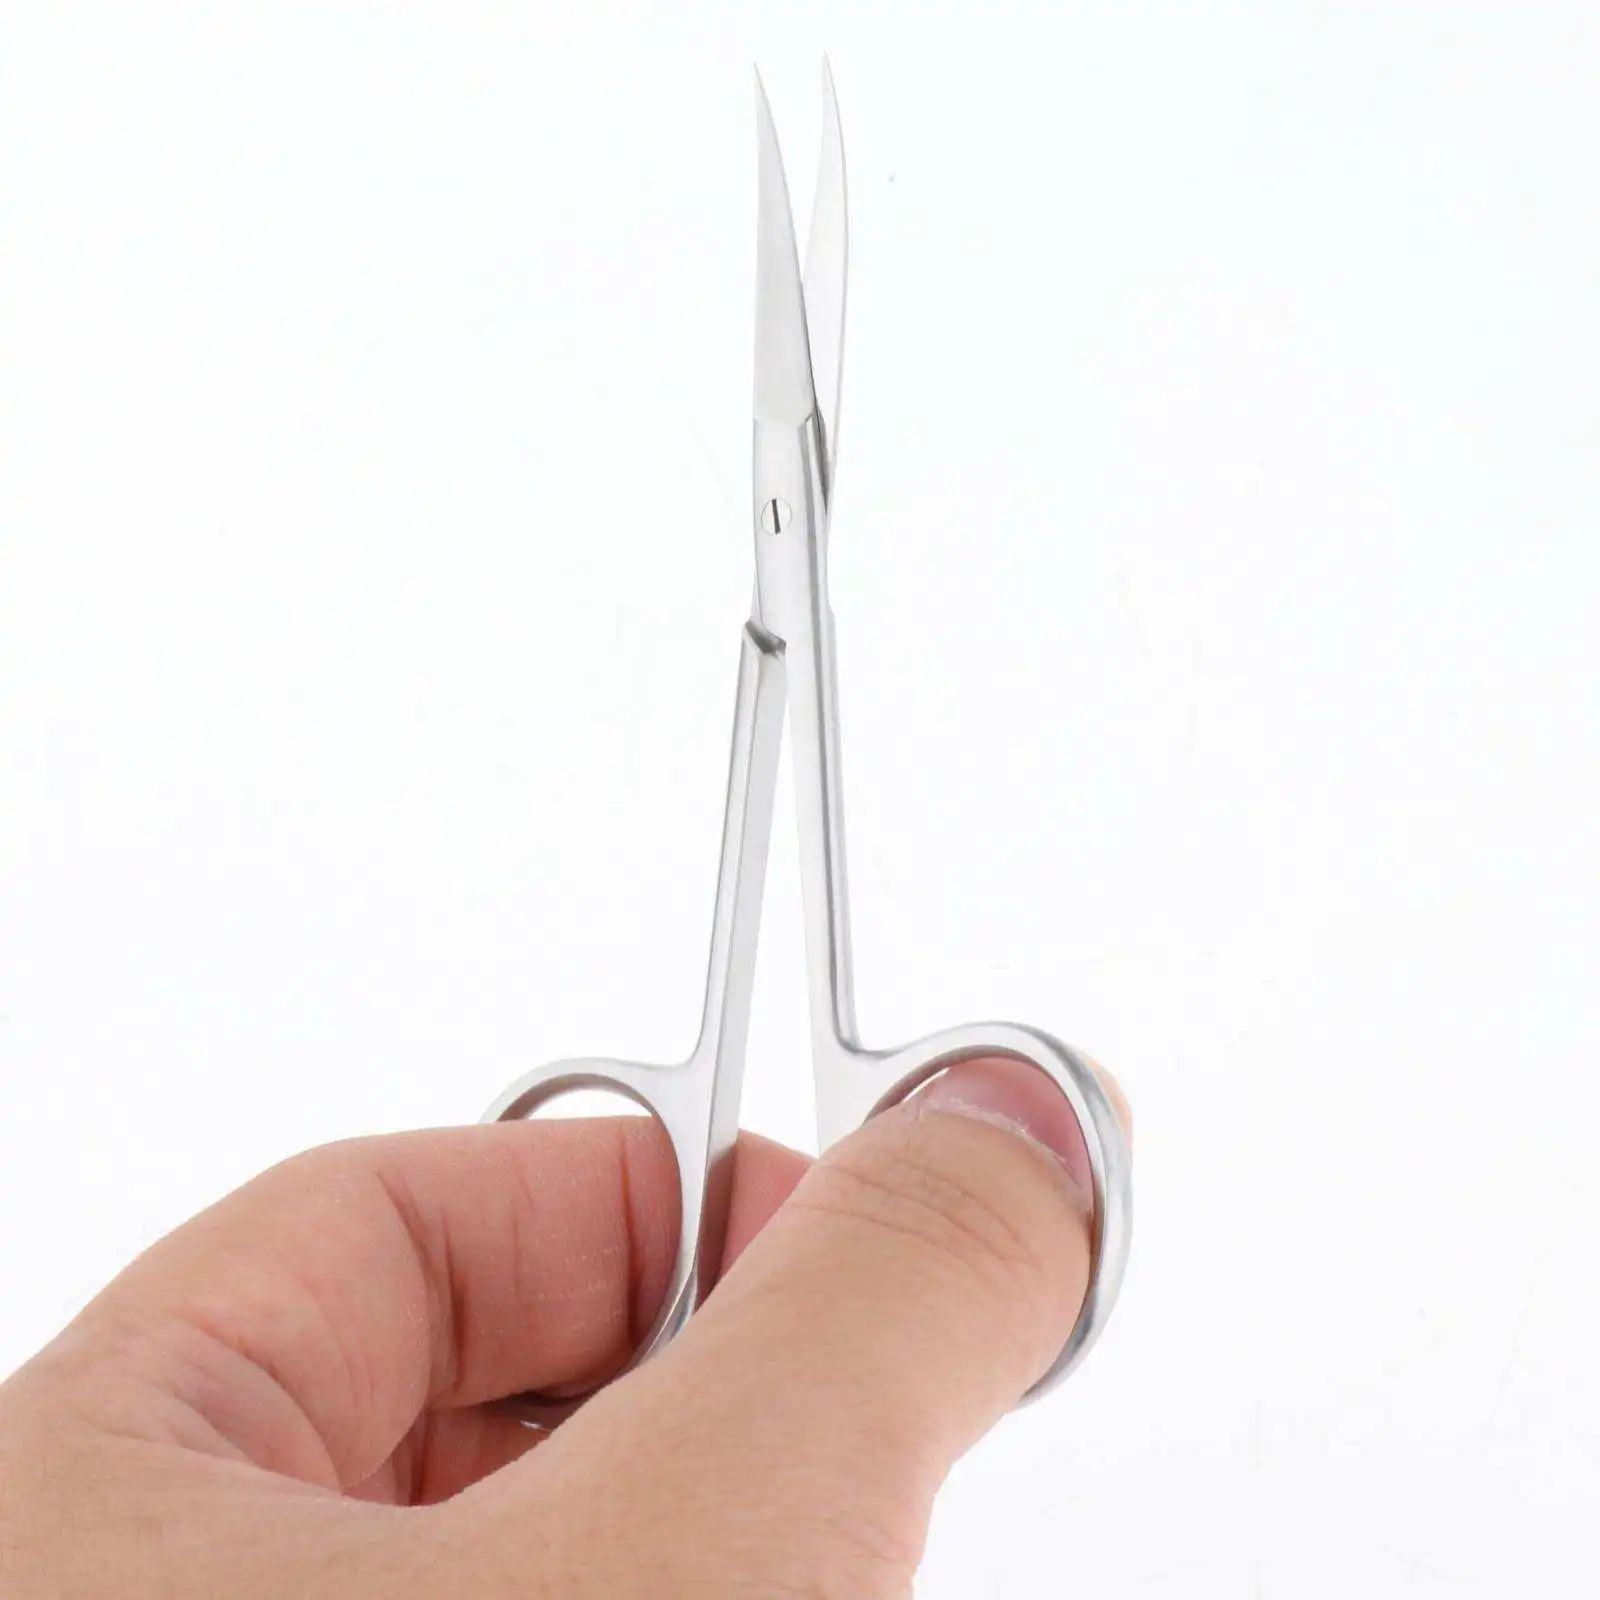 Cuticle Scissors Portable Multi-Purpose Curved Grooming Tool Trimming Scissors for Eyelashes Ear Hair Mustache Pedicure Hotel